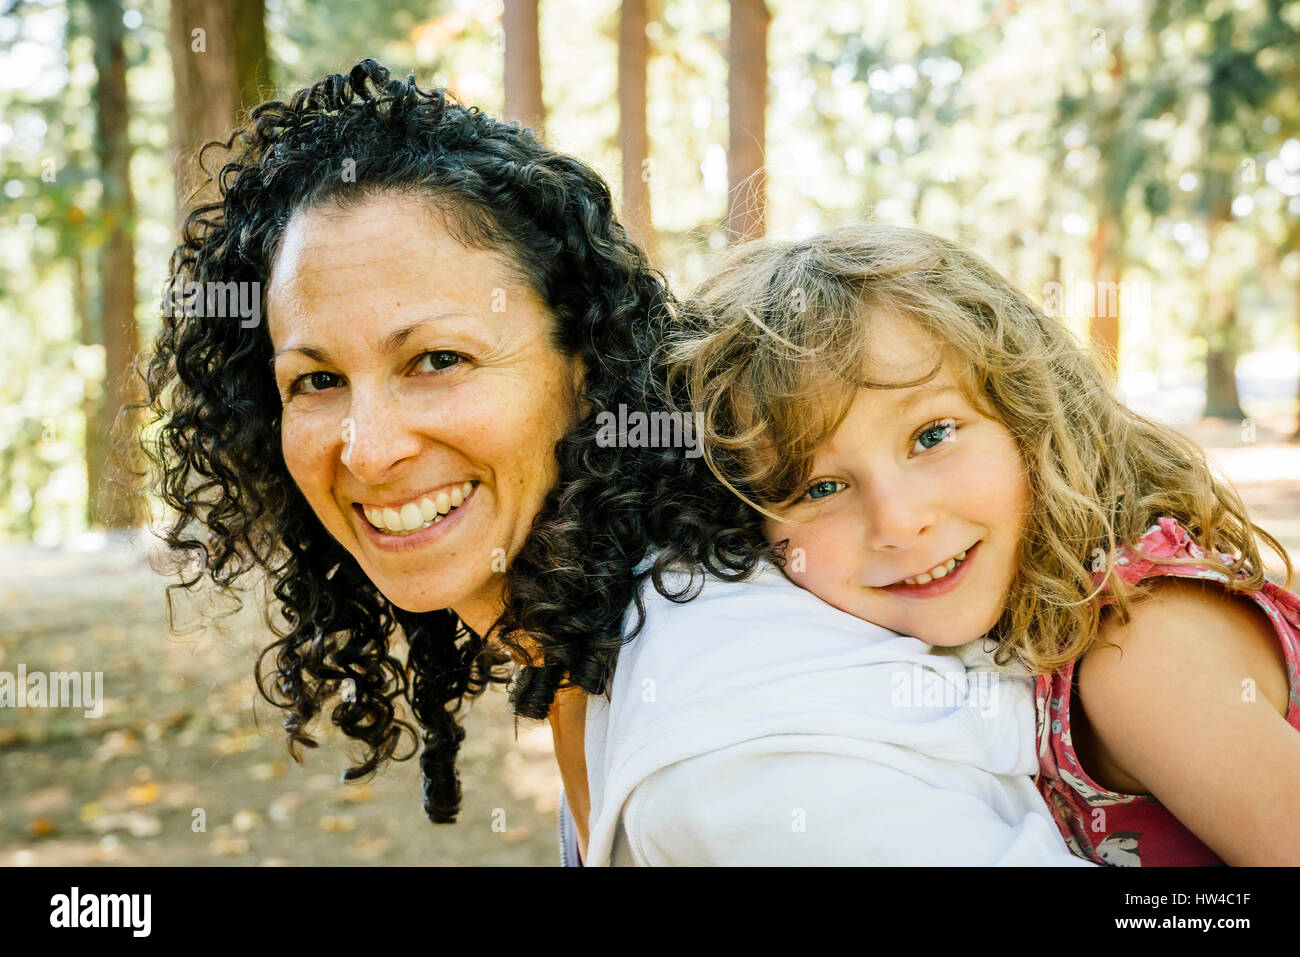 Portrait of smiling Caucasian mother and daughter Banque D'Images